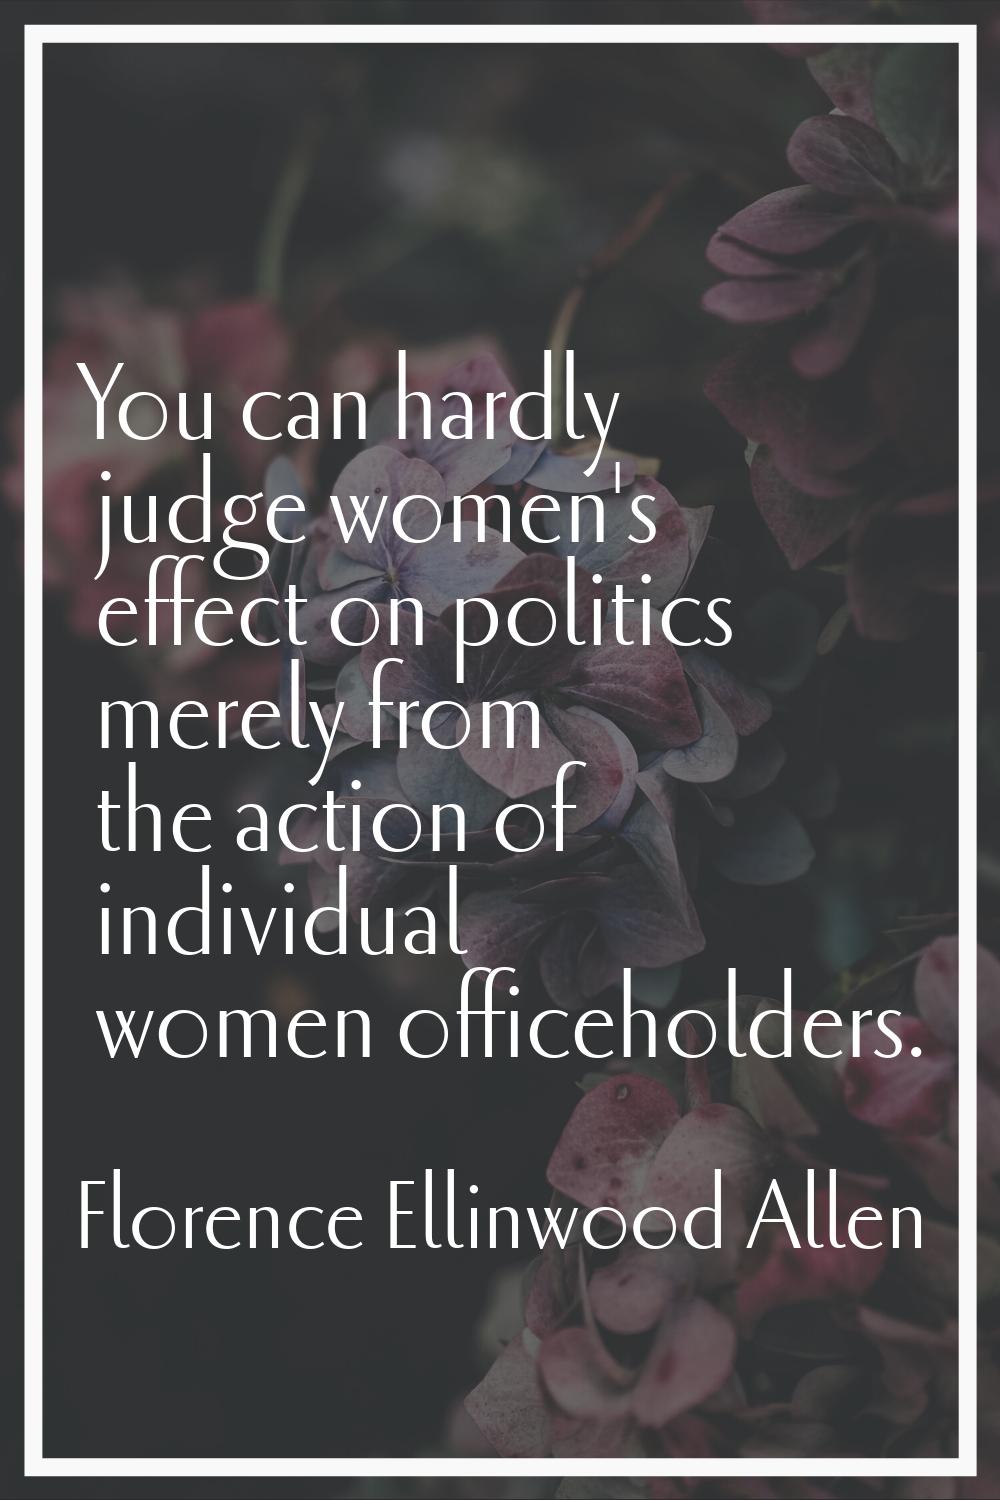 You can hardly judge women's effect on politics merely from the action of individual women officeho